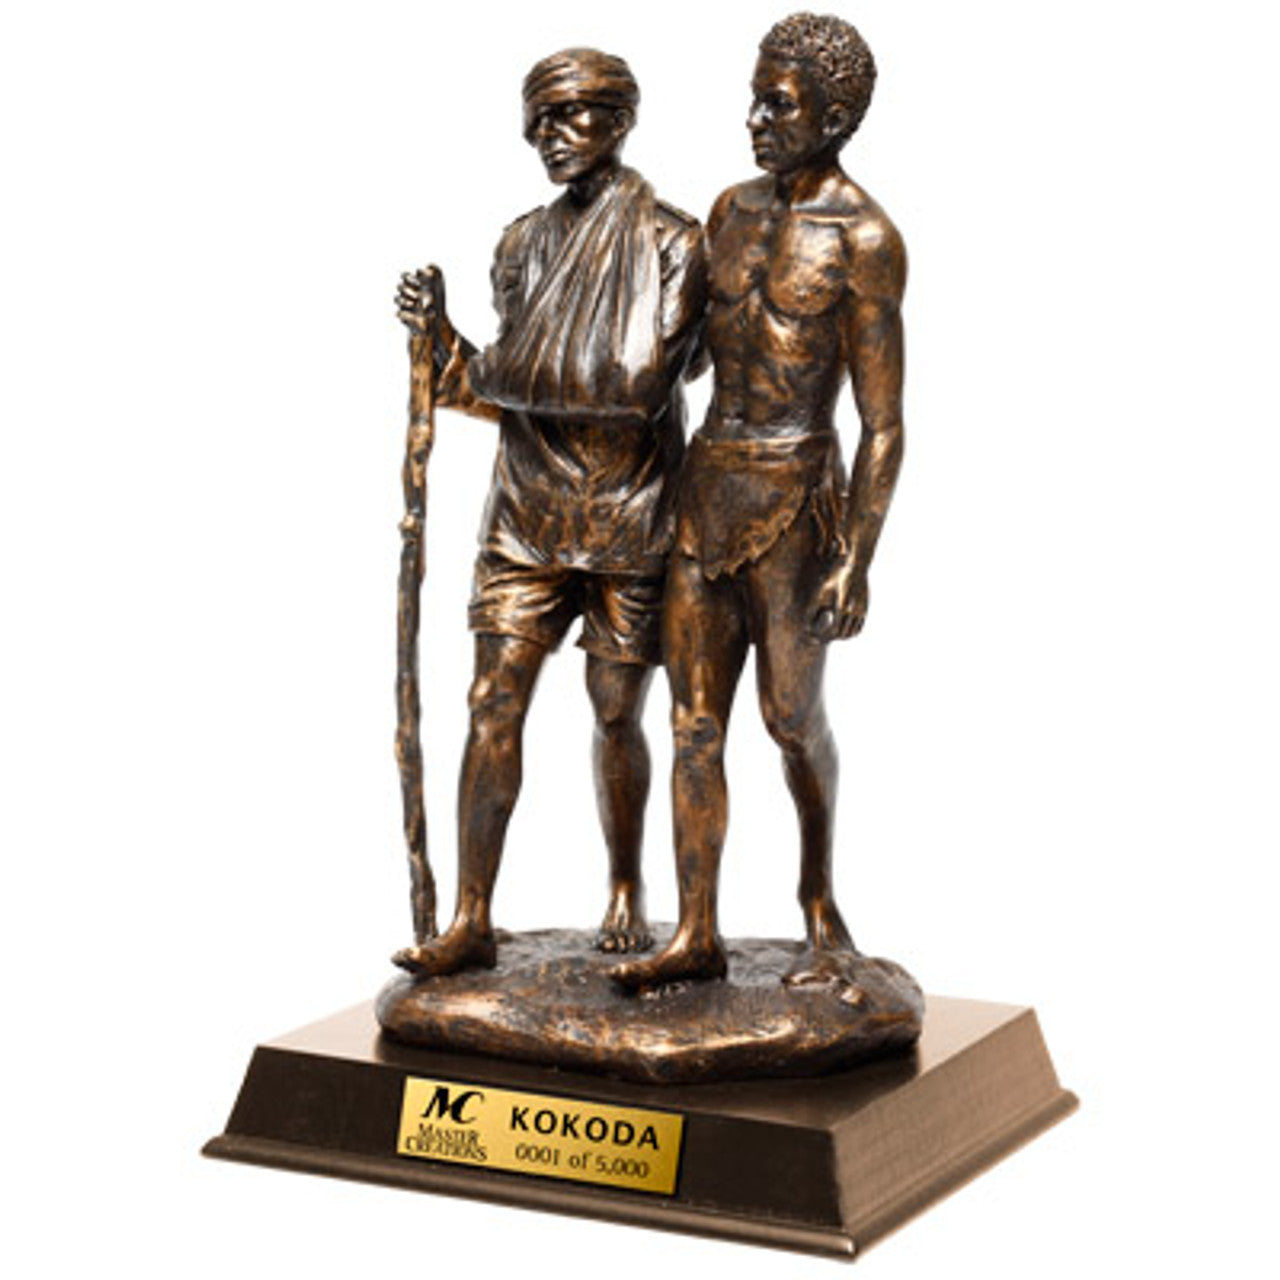 The Kokoda Figurine is a truly special and unique piece that captures the iconic image of a PNG native helping a wounded soldier. Standing at an impressive height of 250mm, this figurine is the perfect gift, award, or collectable for serving members or veterans. www.defenceqstore.com.au